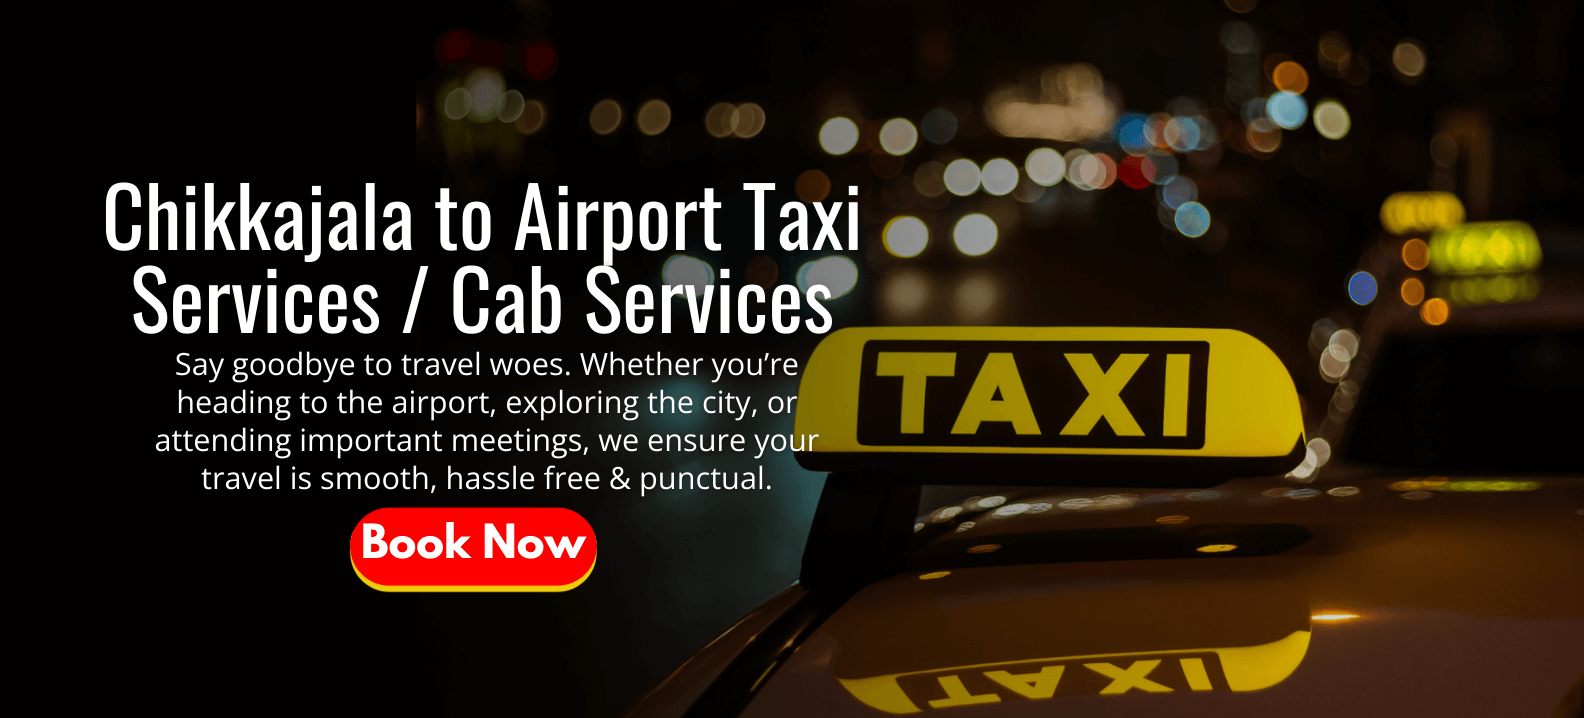 Chikkajala to Airport Taxi Services _ Cab Services